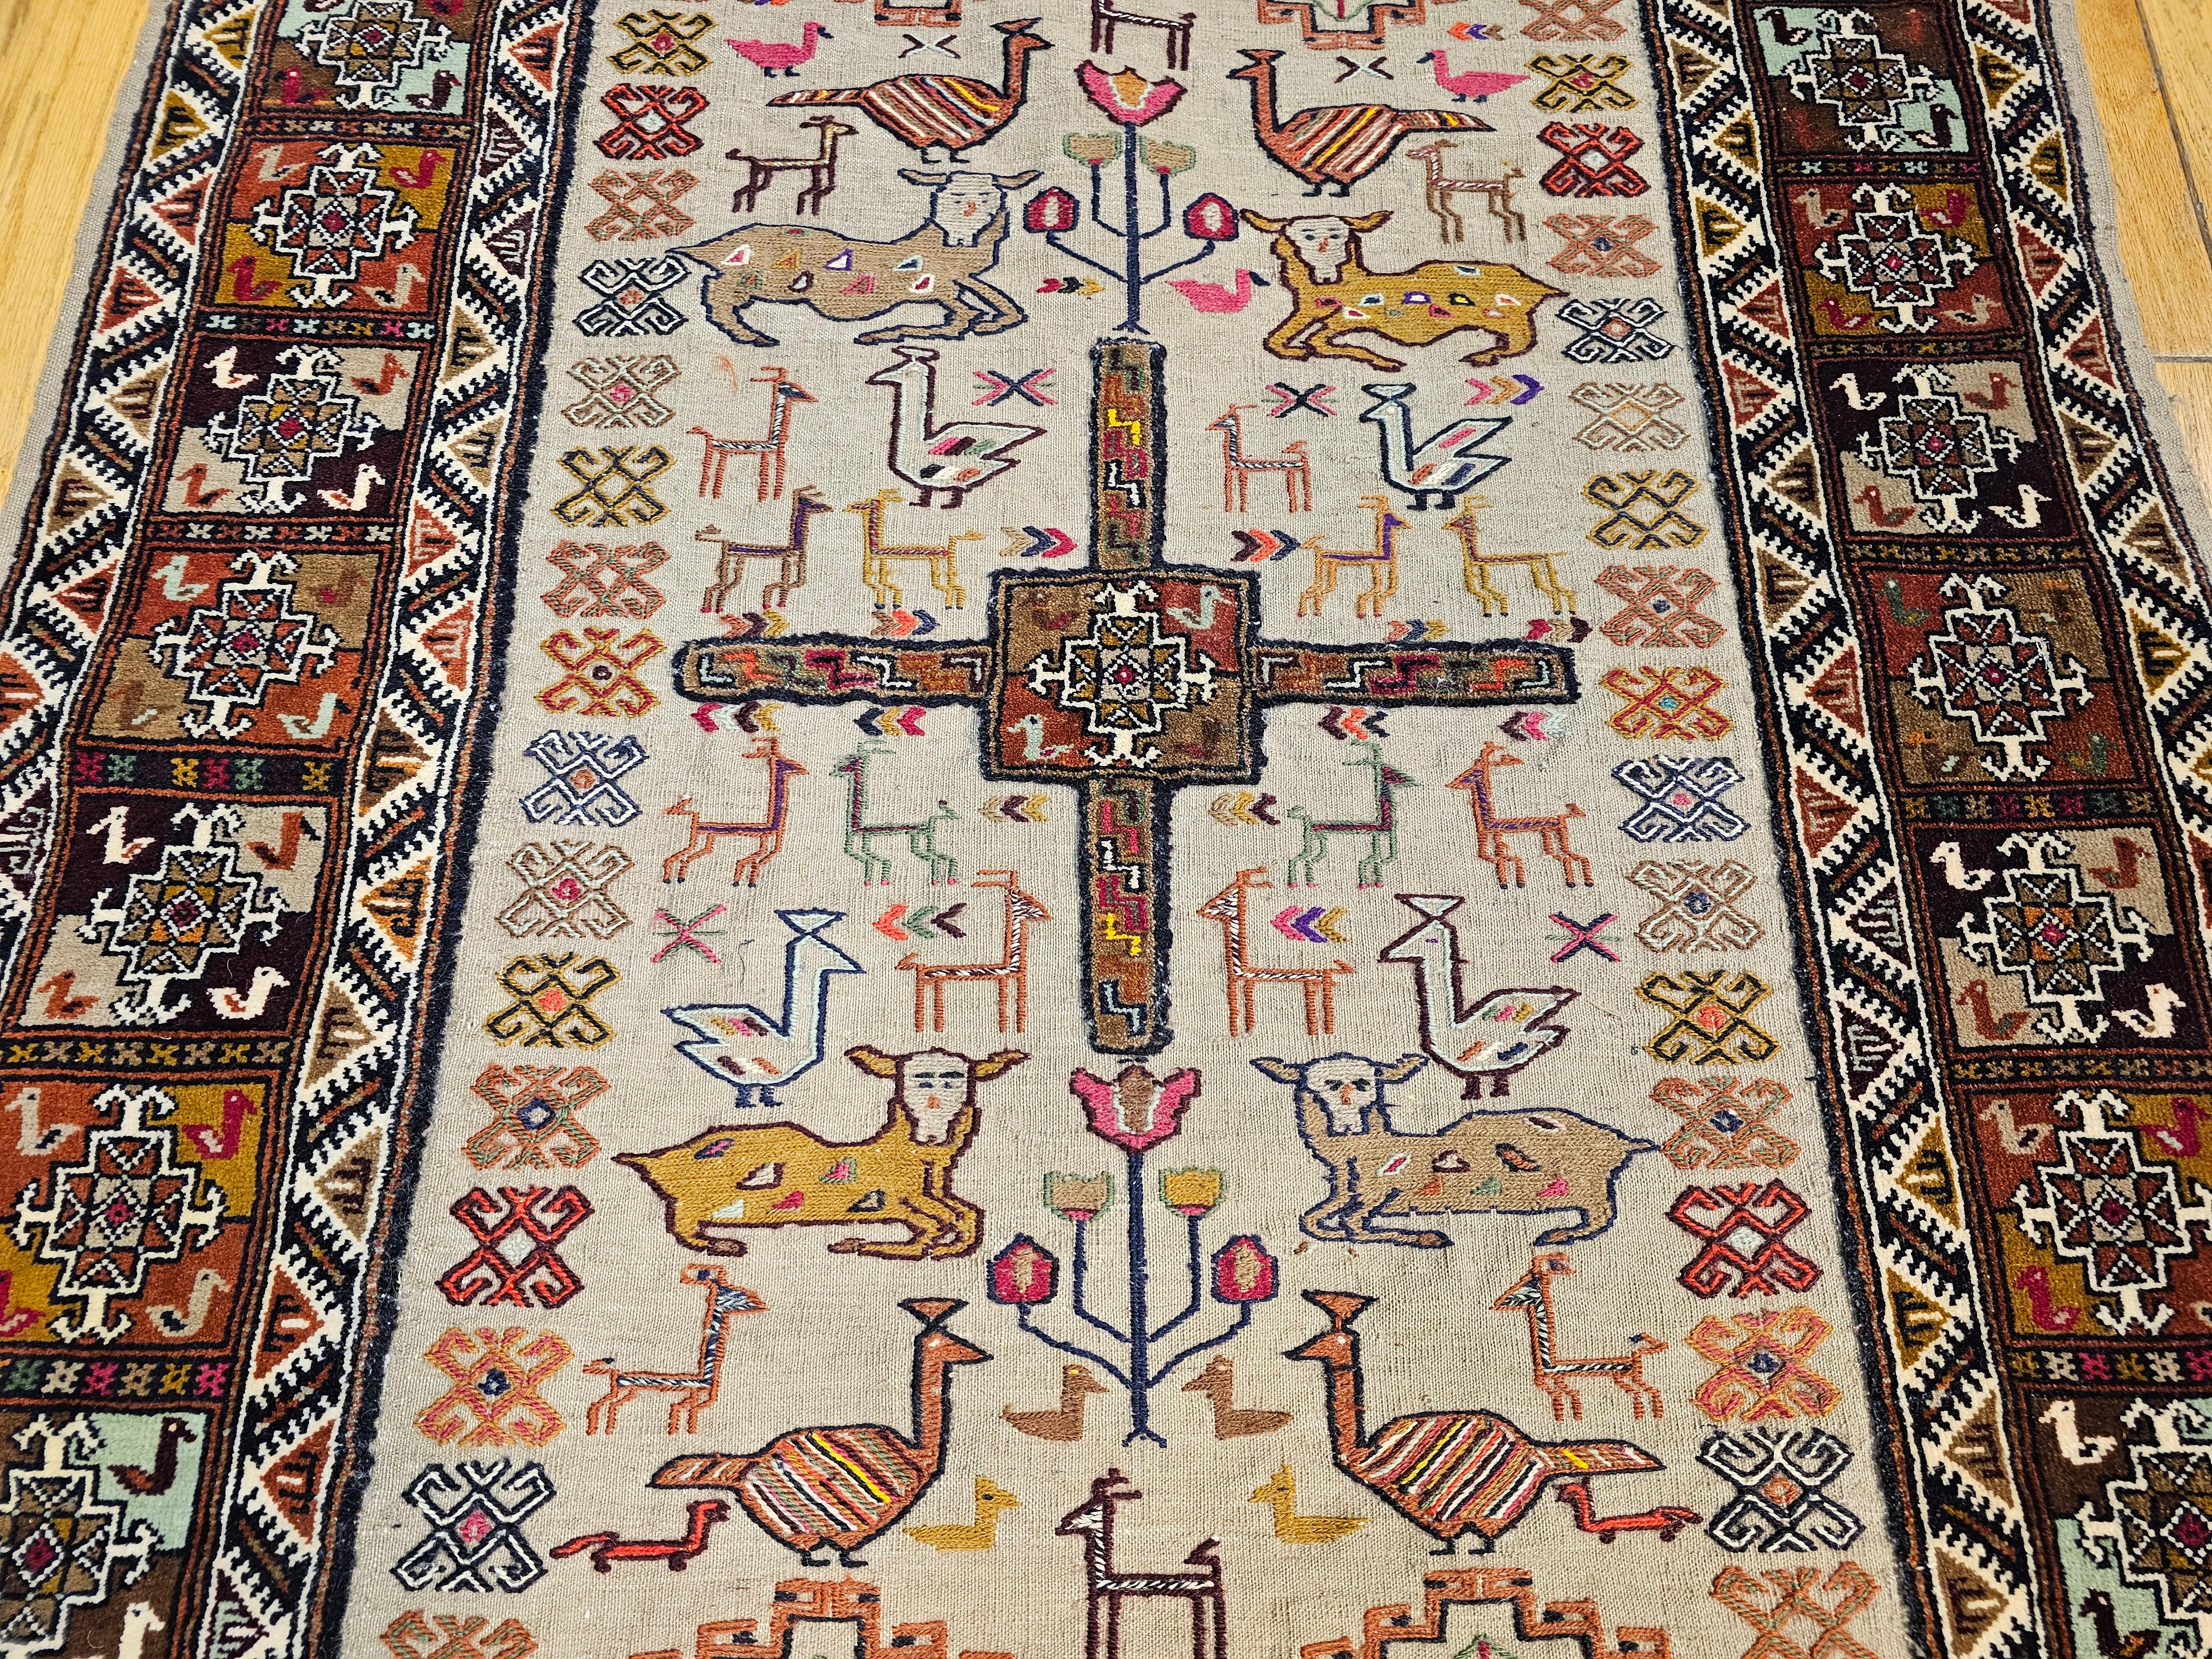 Vintage Hand-Woven Persian Qashqai Tribal Tapestry in Tree of Life Pattern In Good Condition For Sale In Barrington, IL